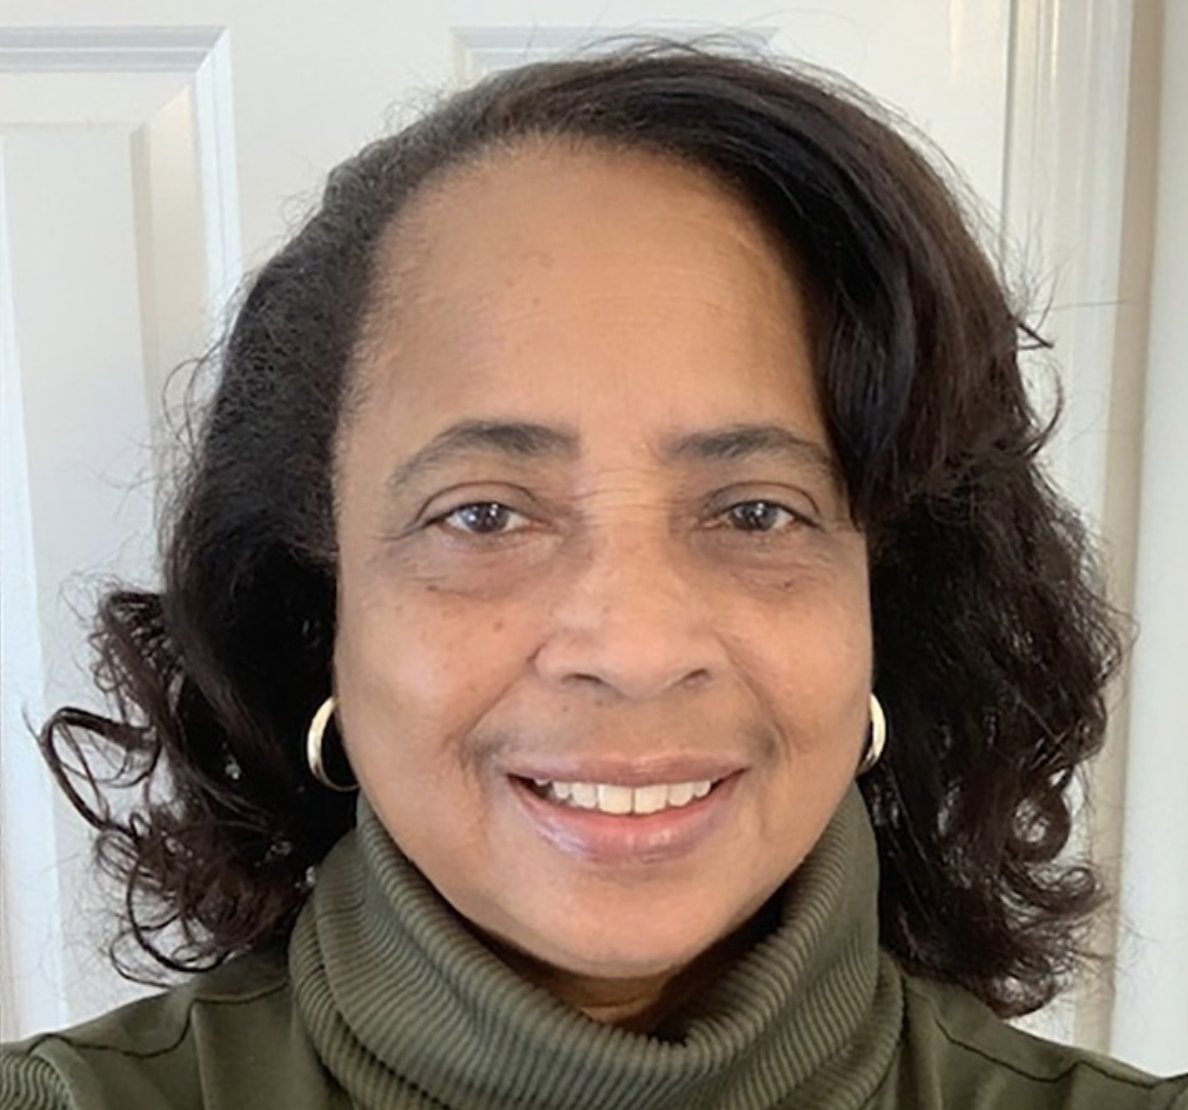 Congrats to ANHE #Nurse Fellow Dr. Karen Rawls for her recognition by @GeorgiaNurses for National Nurses Month! Dr. Rawls is a longstanding advocate for social justice & racial equity in nursing & beyond. Read more at link in bio or zurl.co/Ouwm.